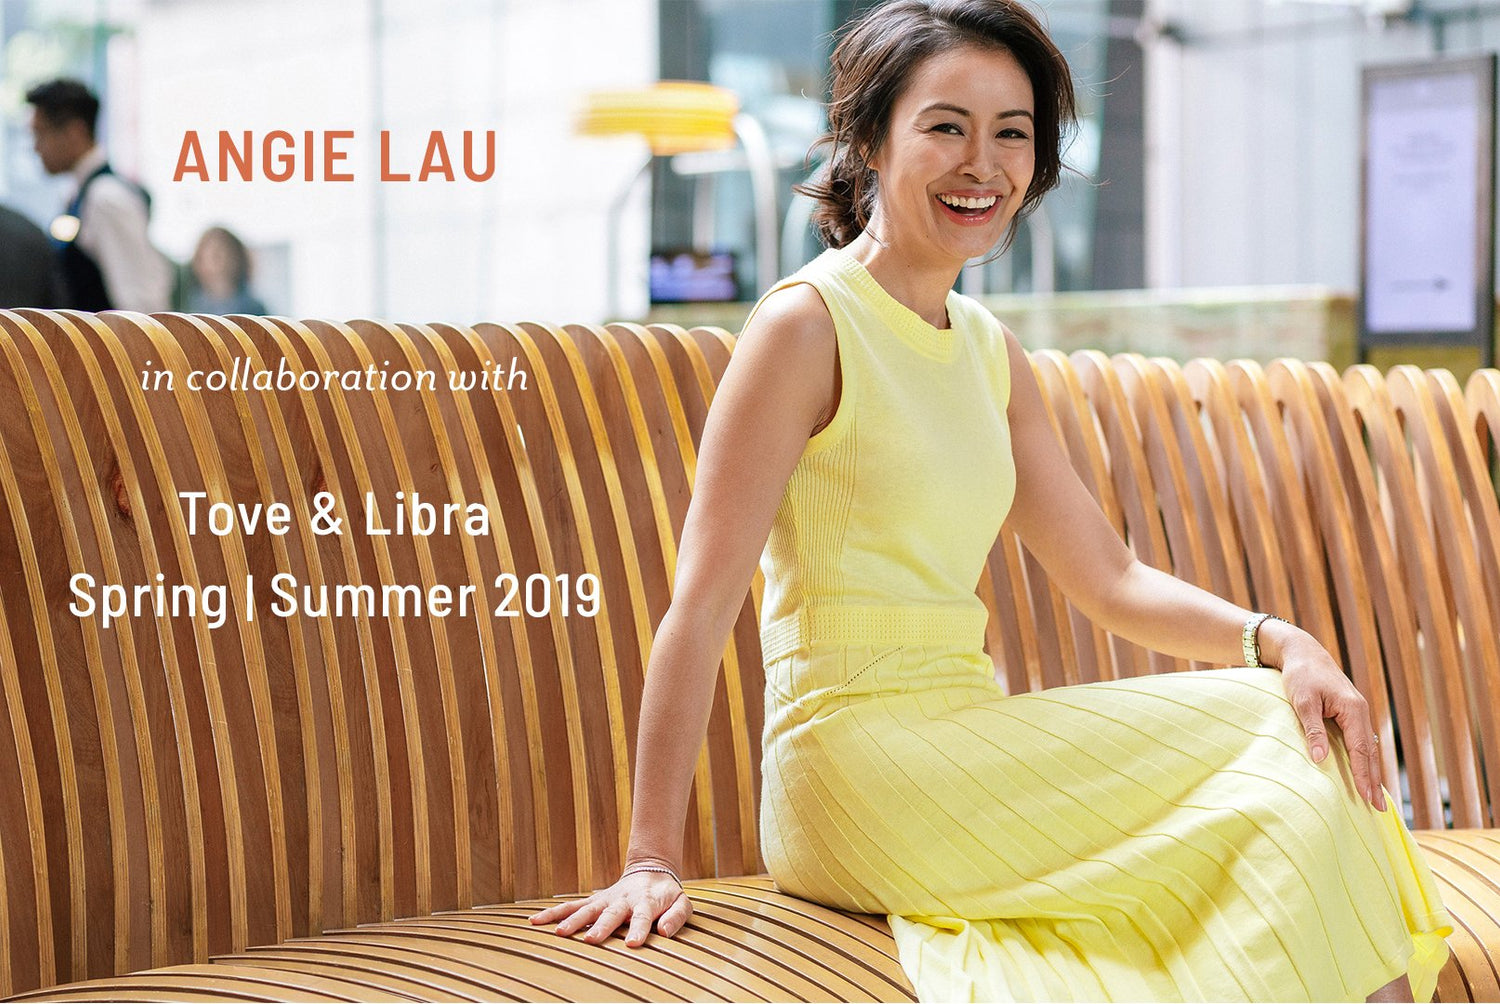 SS19 Lookbook: featuring Angie Lau